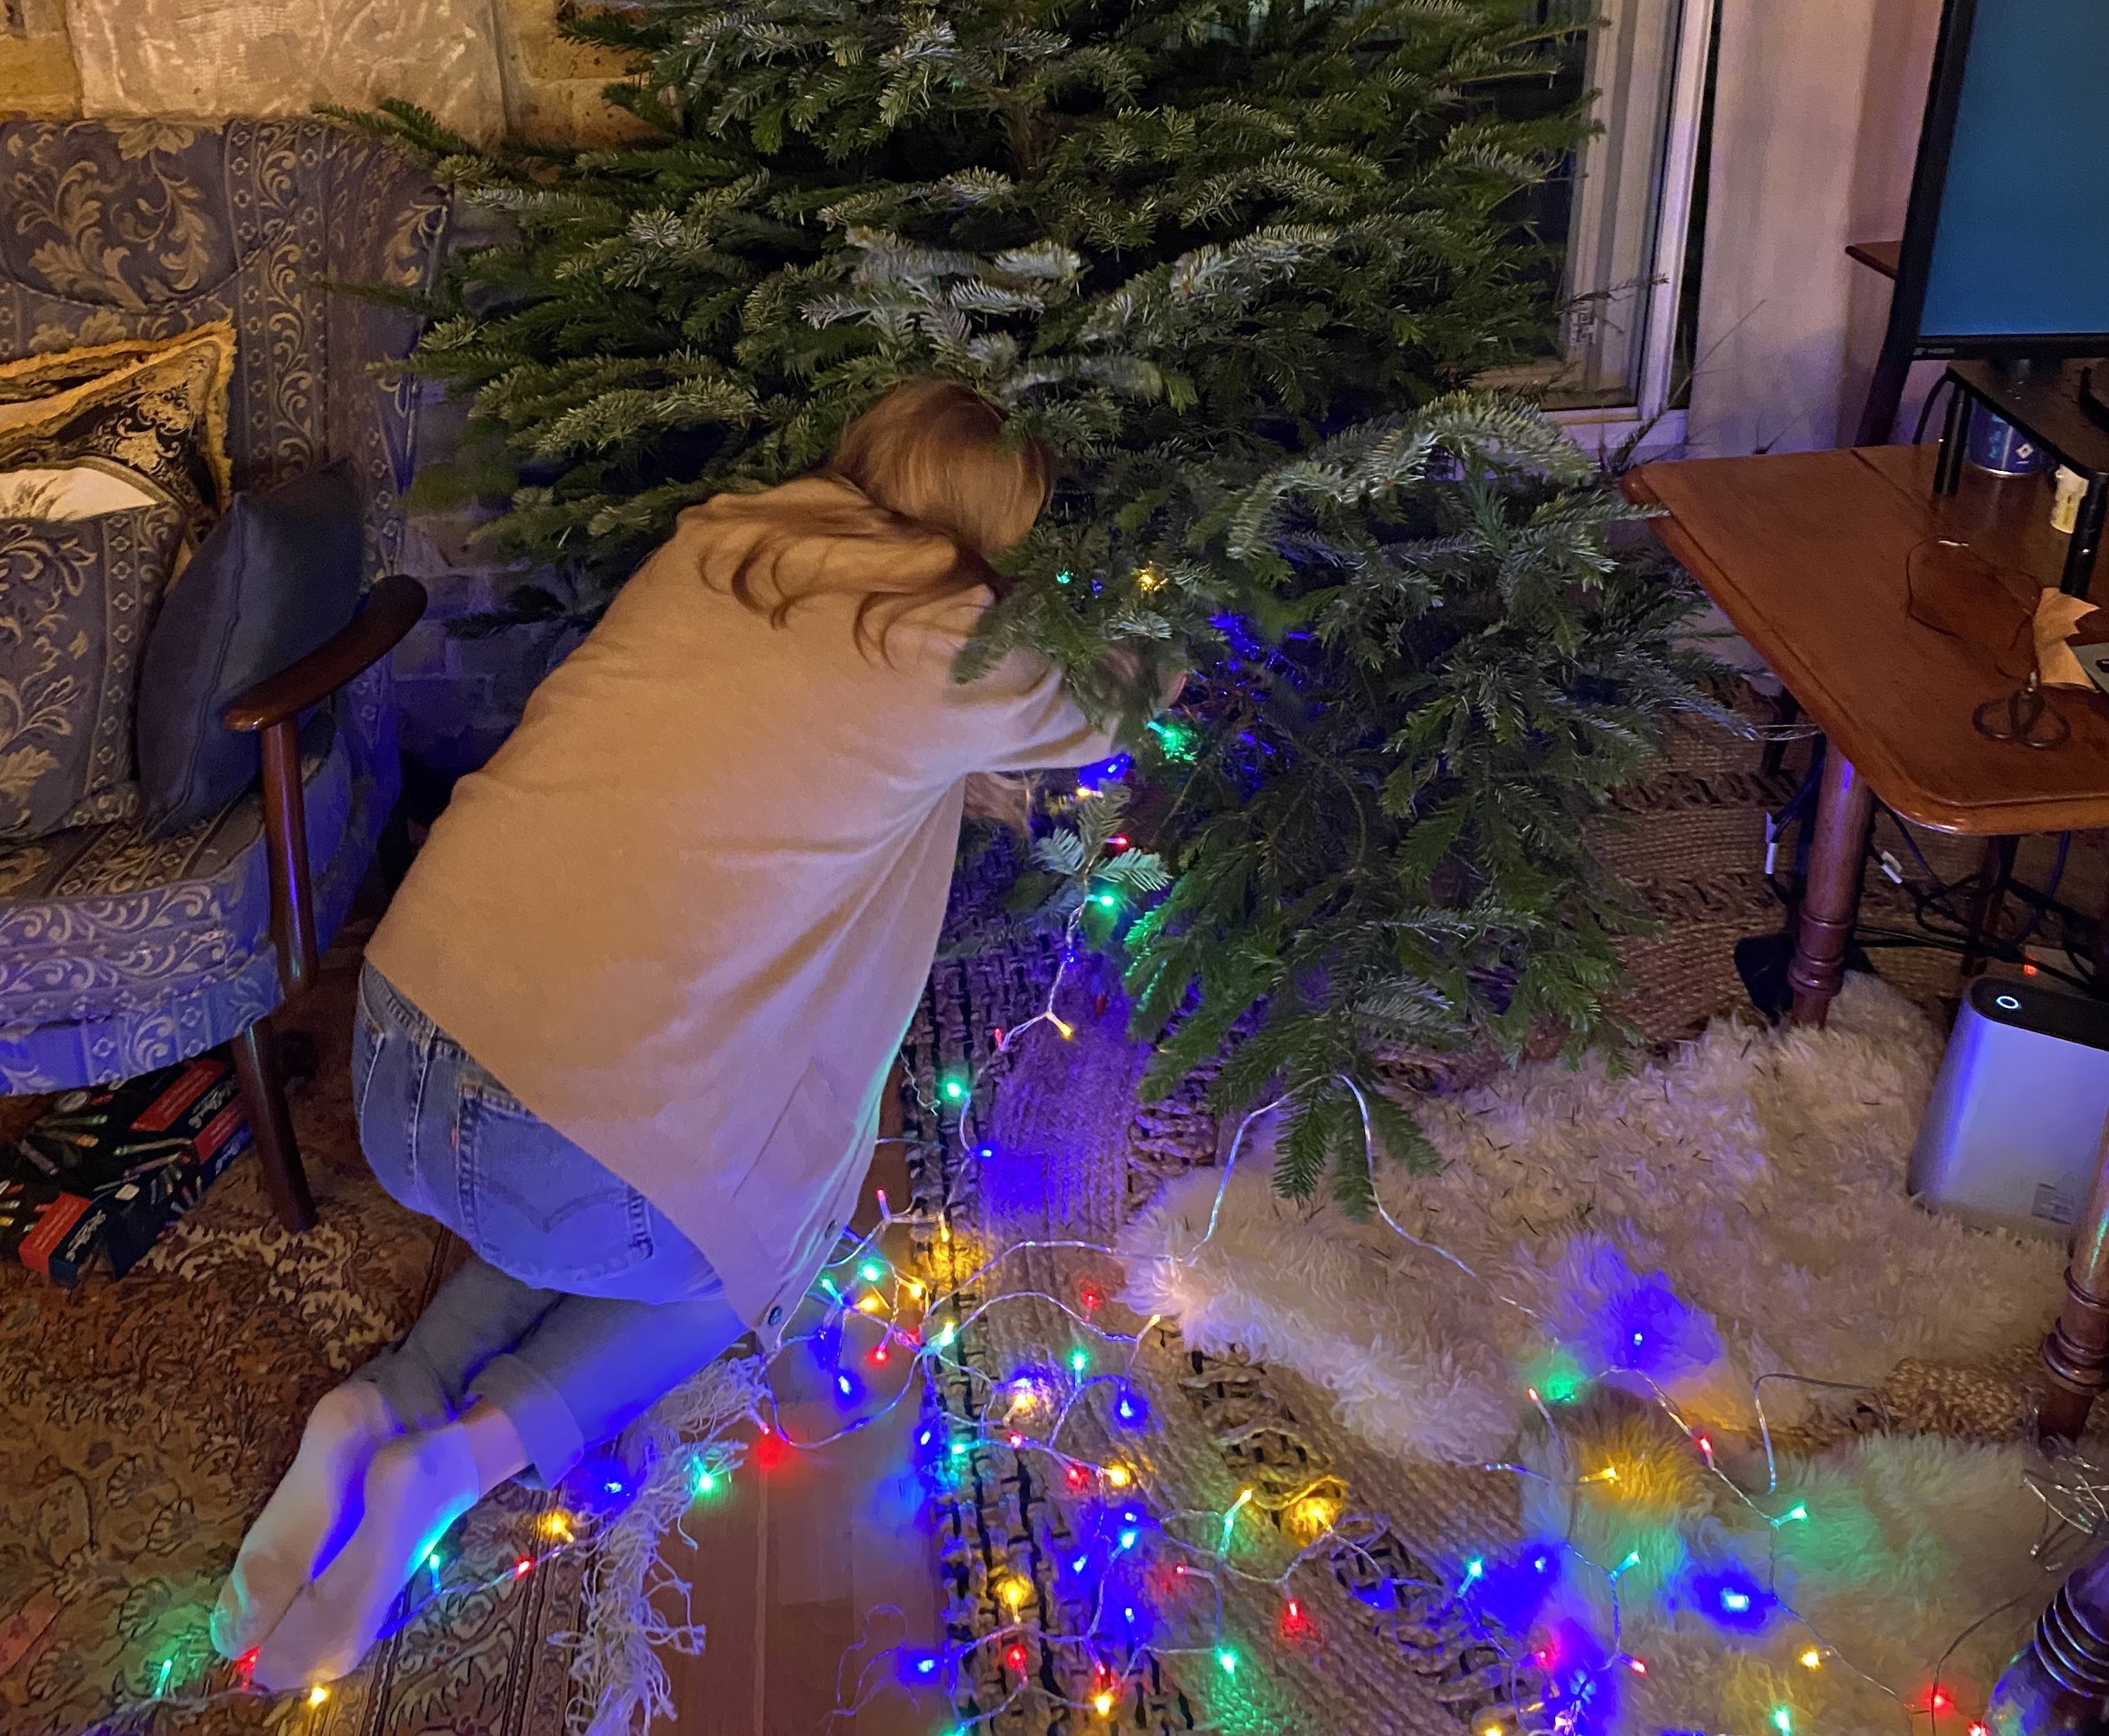 emma bending over the trunk of the tree, holding the lights